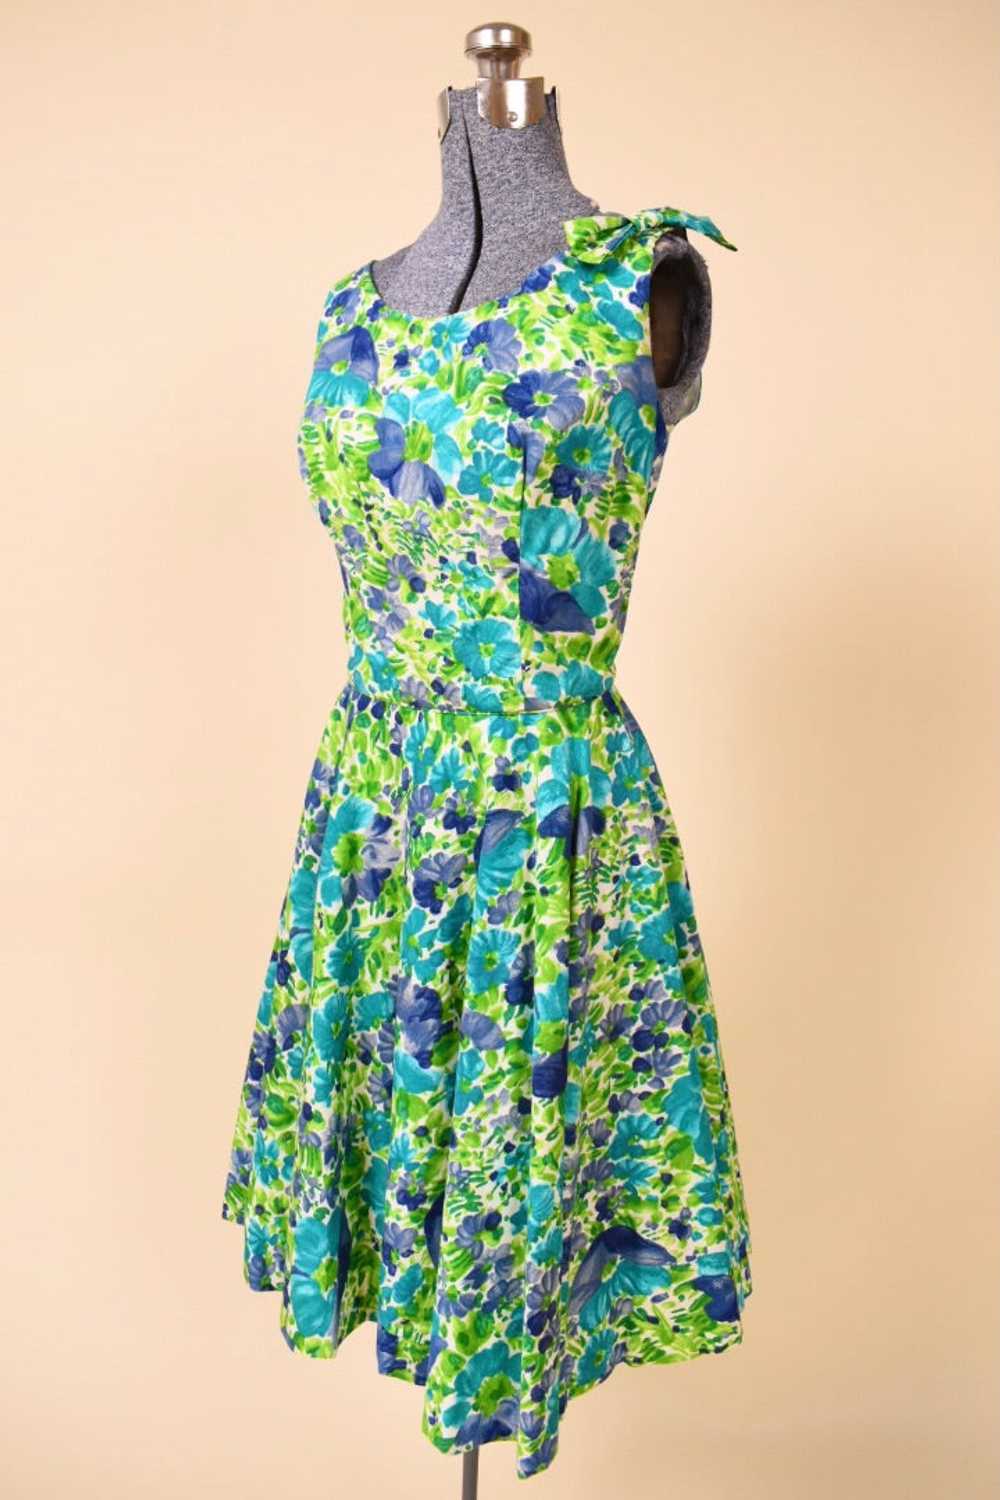 Green Floral Day Dress w/ Bow By Jay Herbert, S - image 2